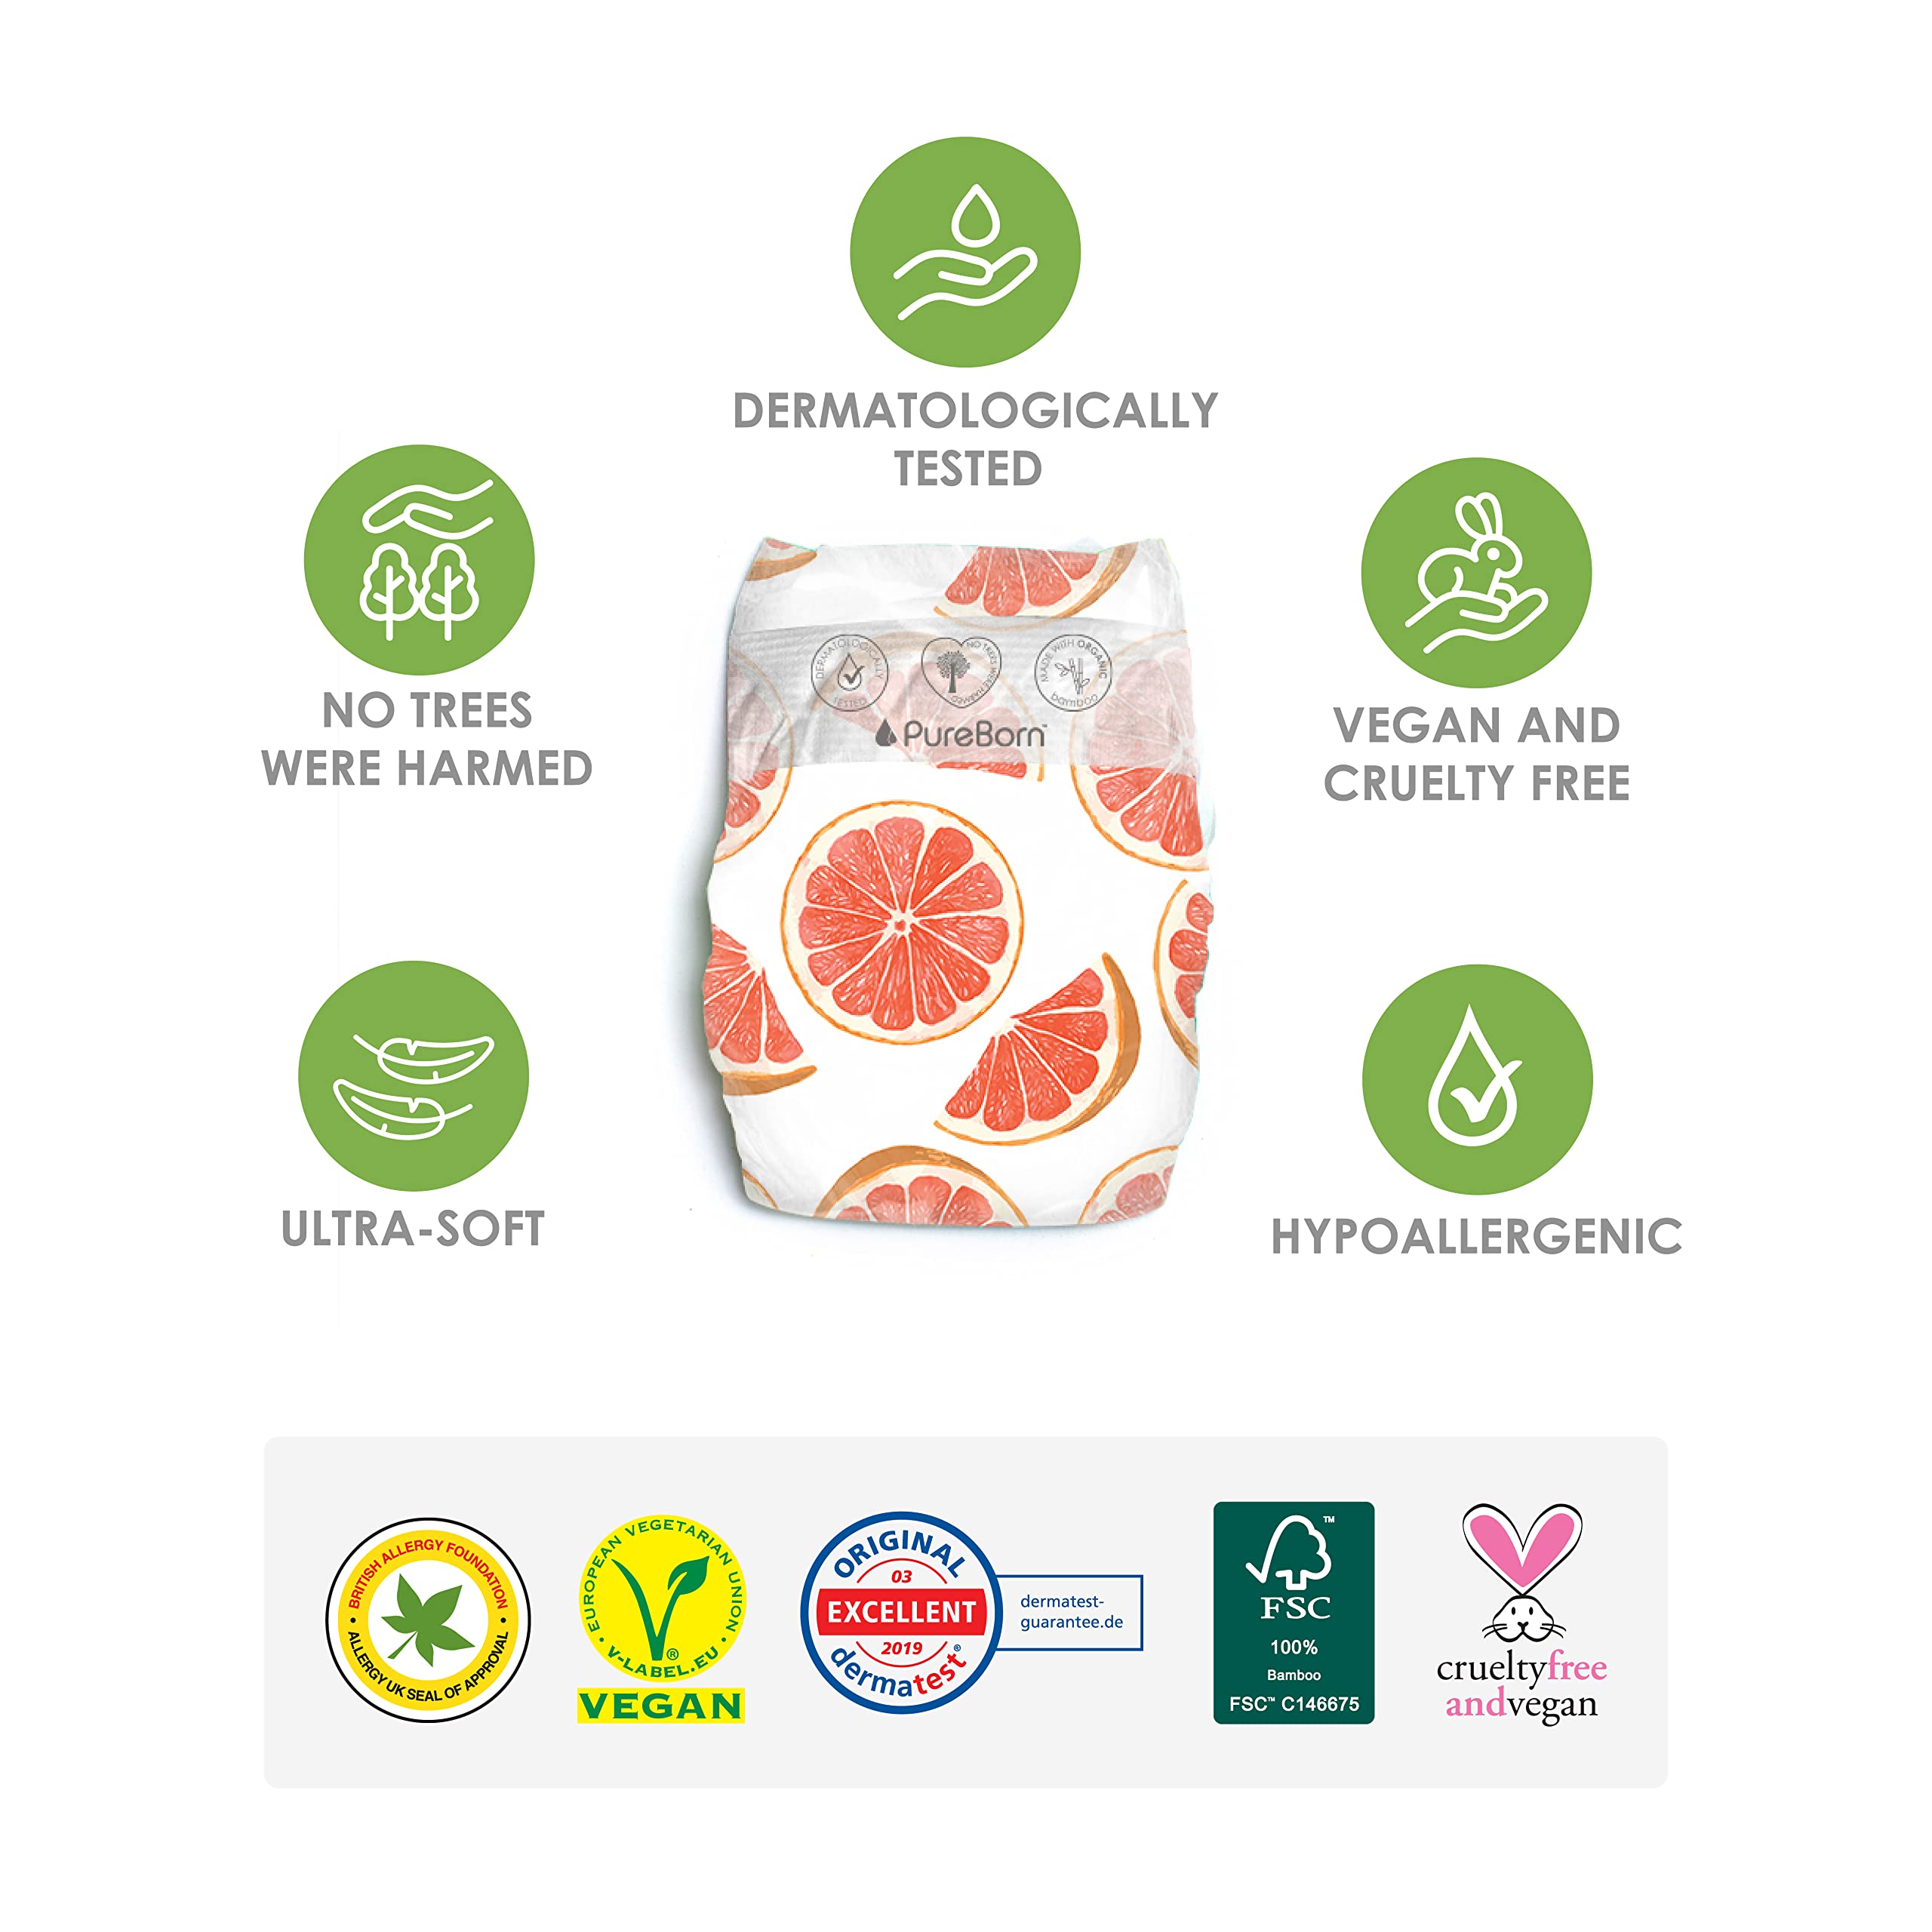 Pureborn Organic-Natural Bamboo Baby Disposable Diapers-Nappy -Value Pack- From 0 To 4.5 Kg - 68 Pcs